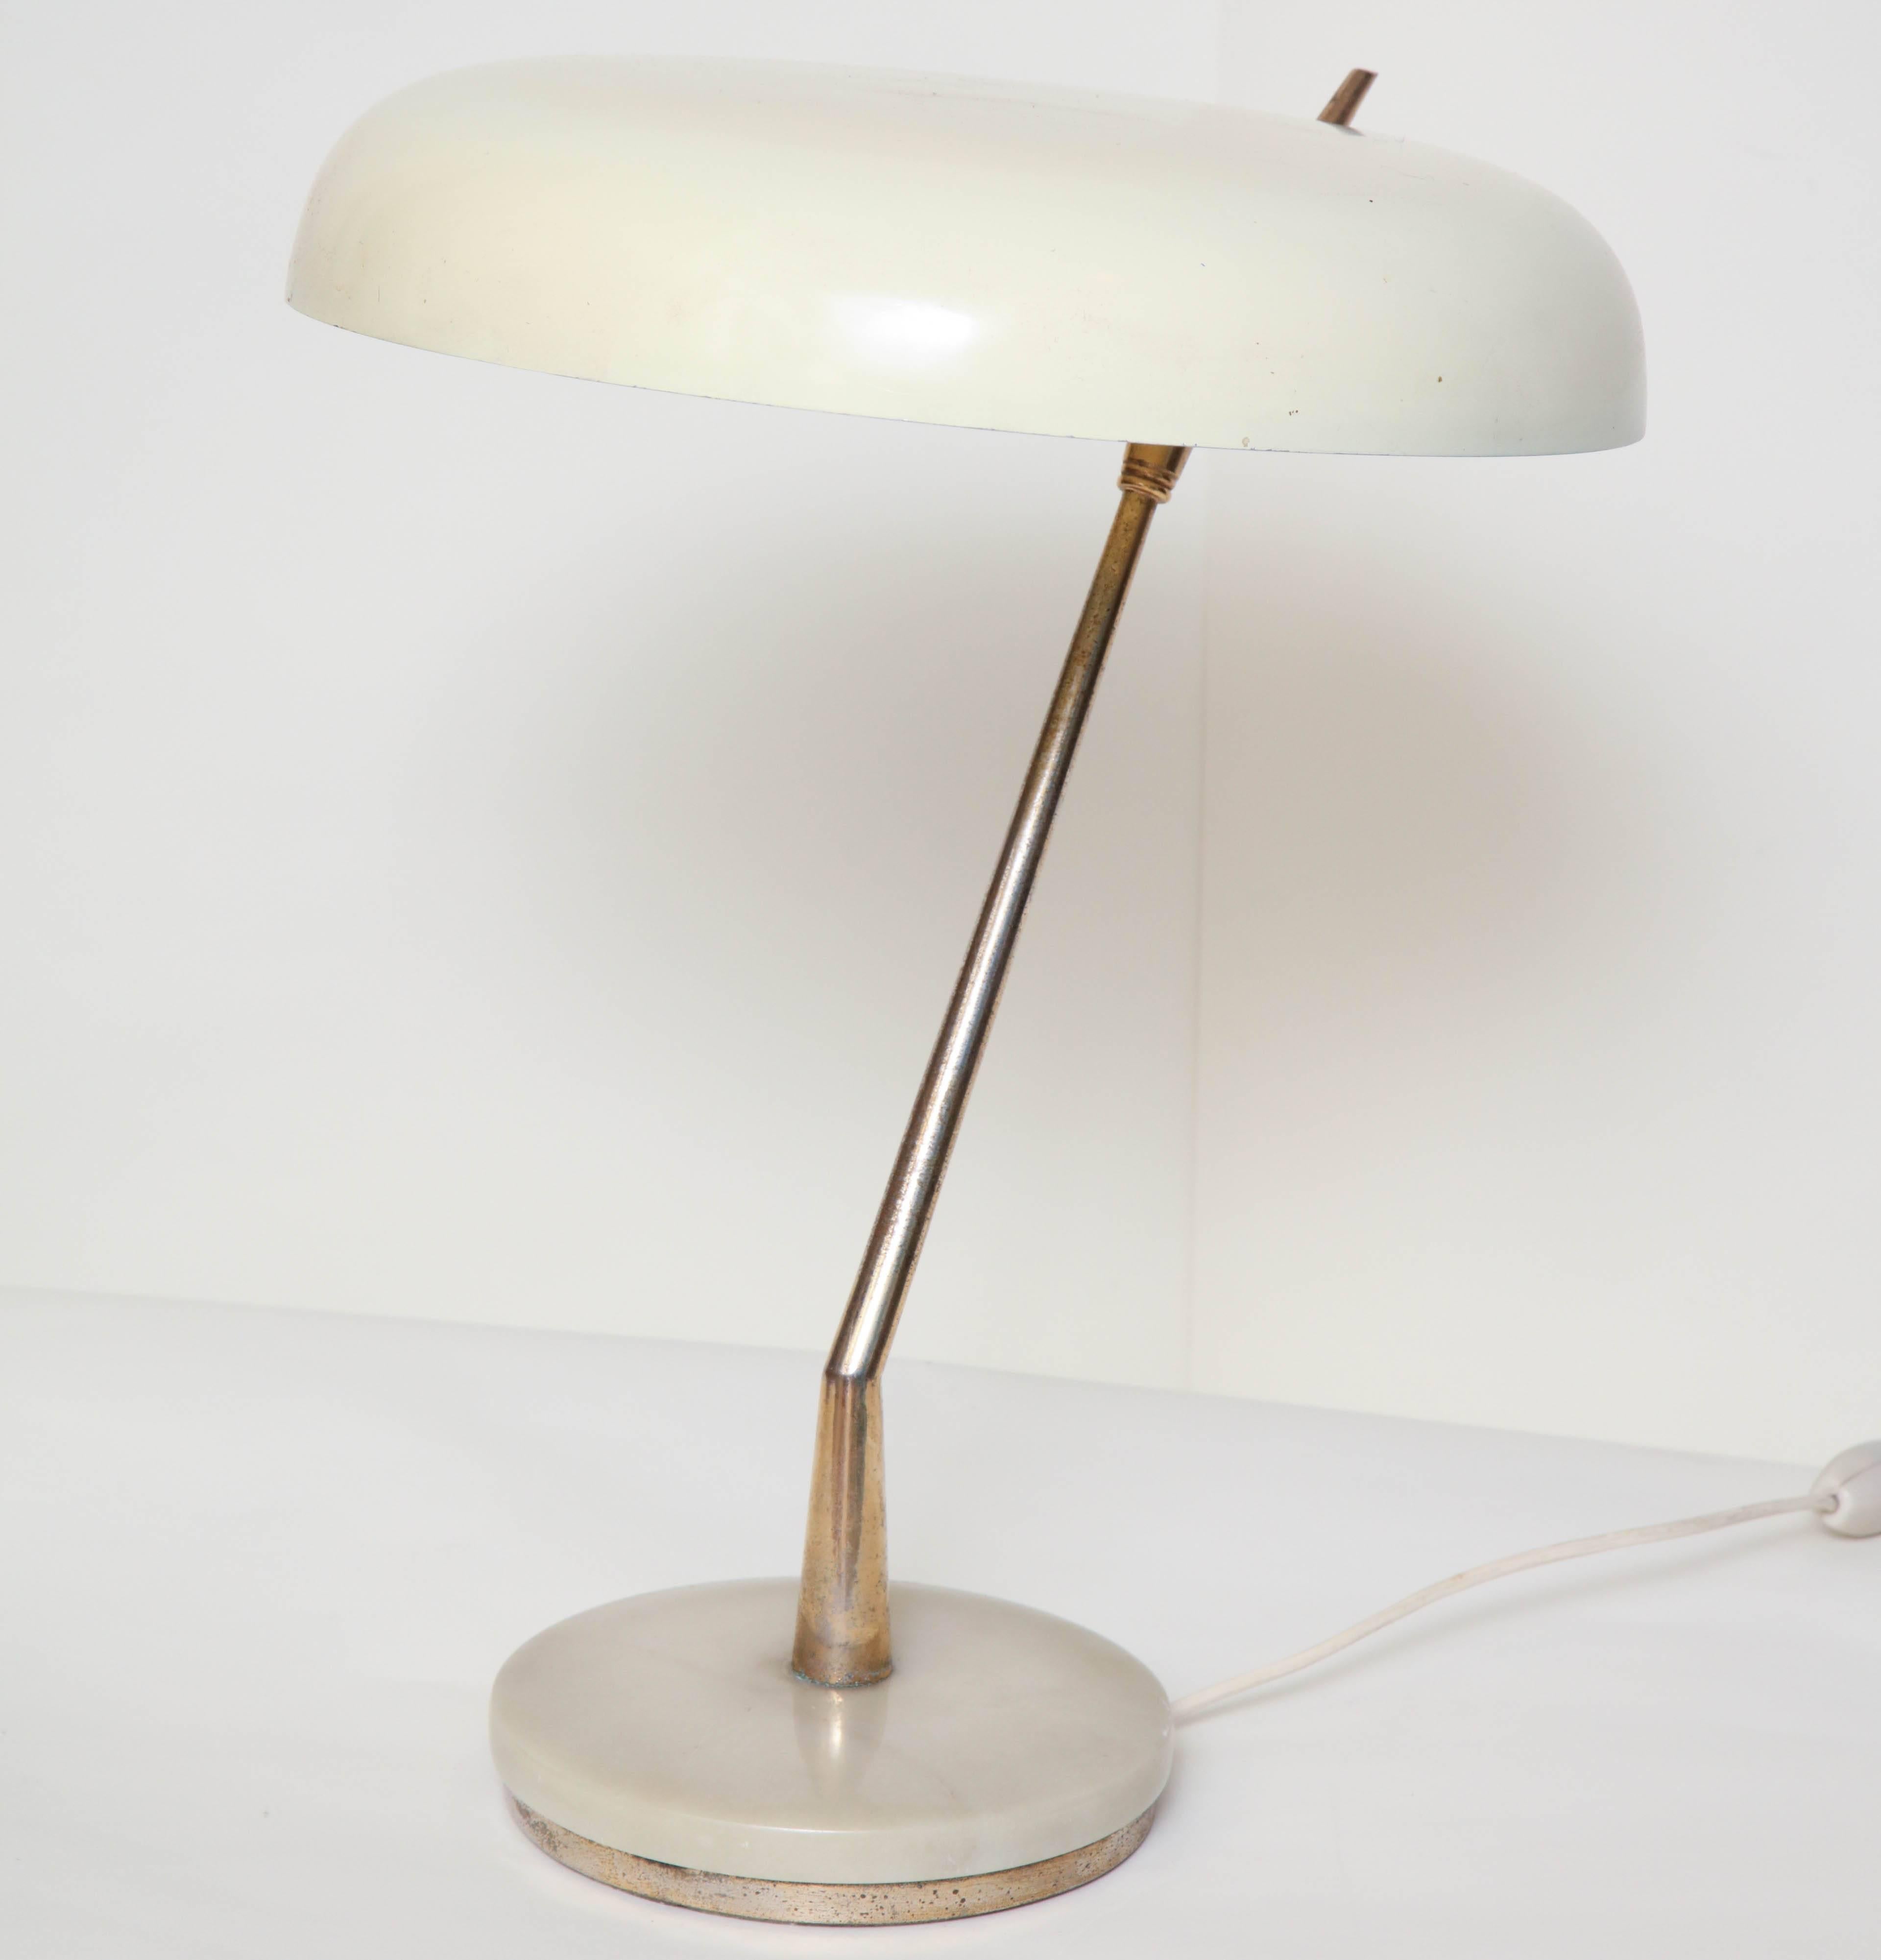 Articulated Table Lamp Attributed to Arredoluce Italian Mid-Century Modern, 1950 2